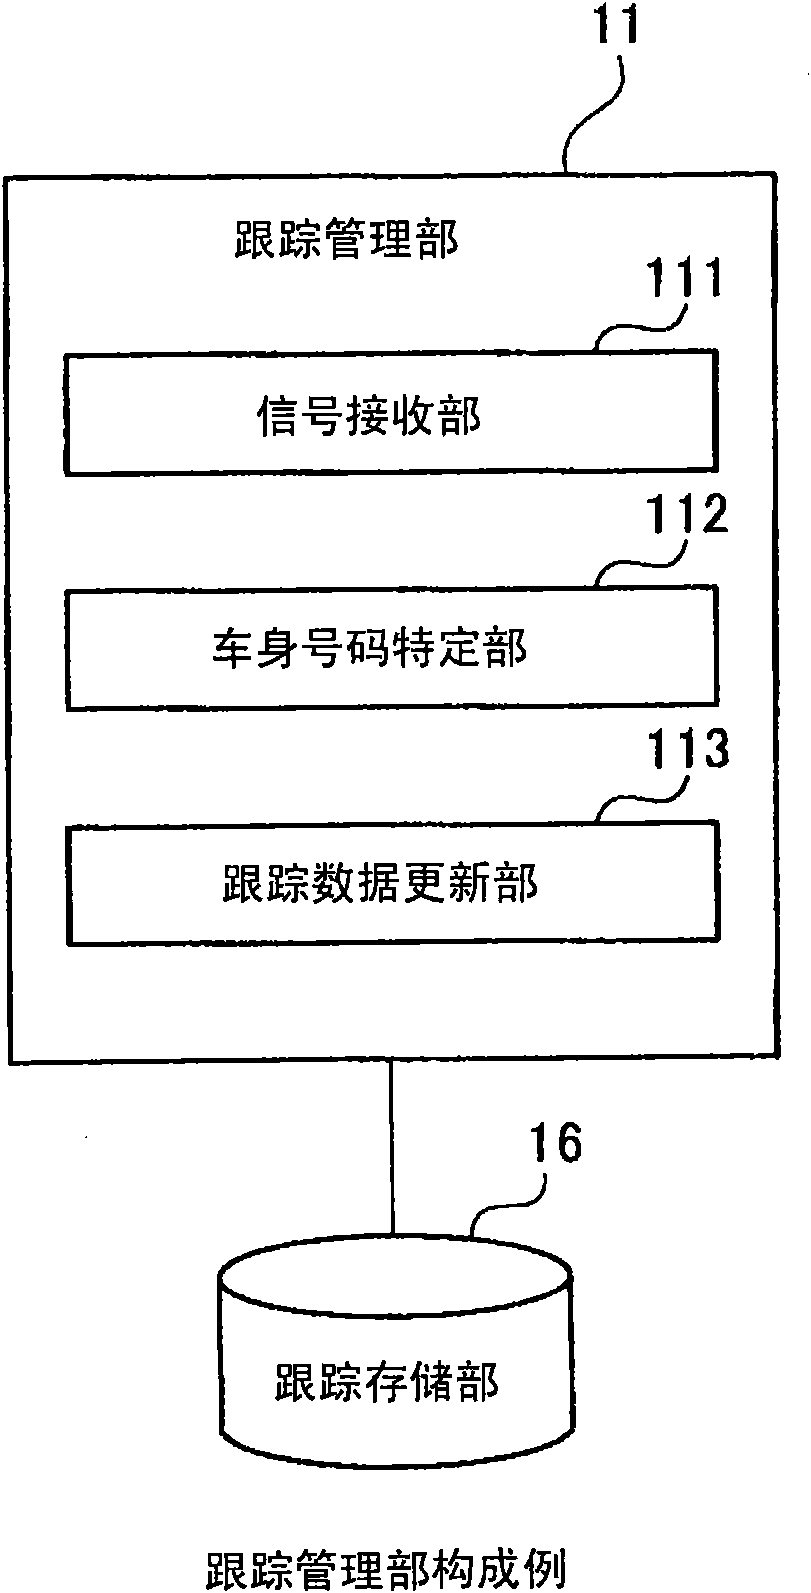 Process control device, process control method, and process control system